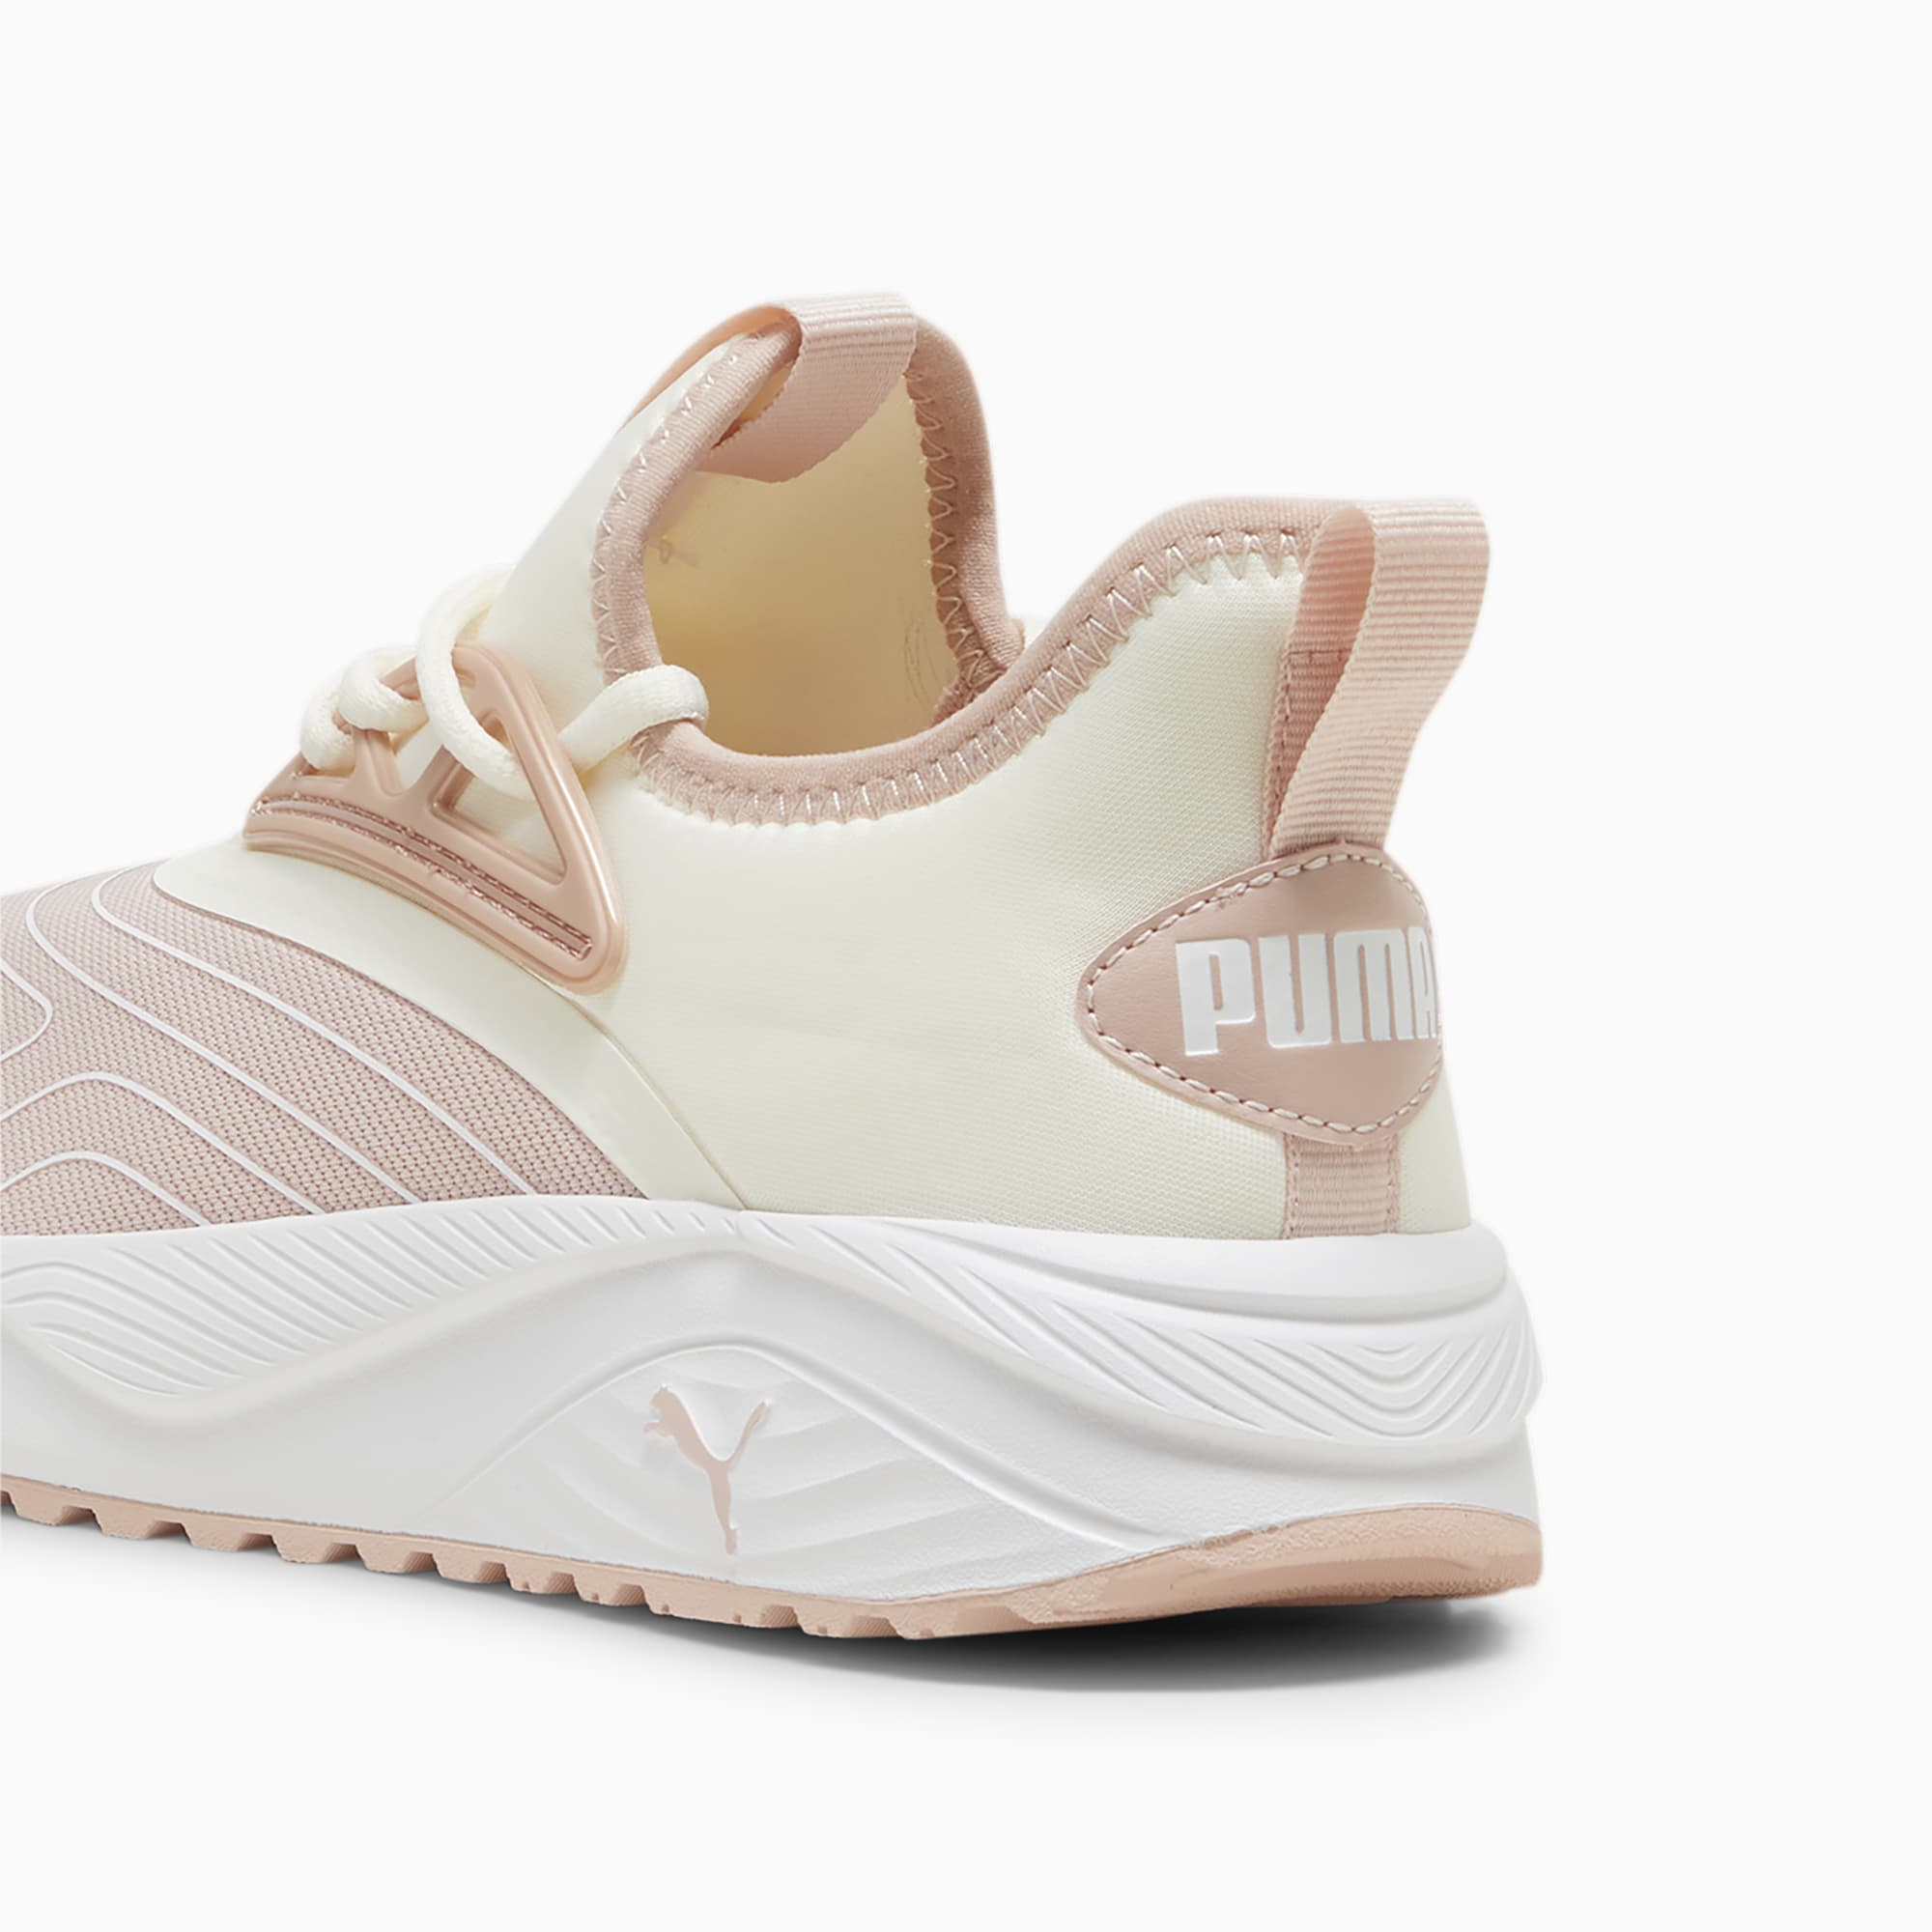 PUMA Pacer Beauty Women's Sneakers, Rose Quartz/Frosted Ivory/Rose Gold